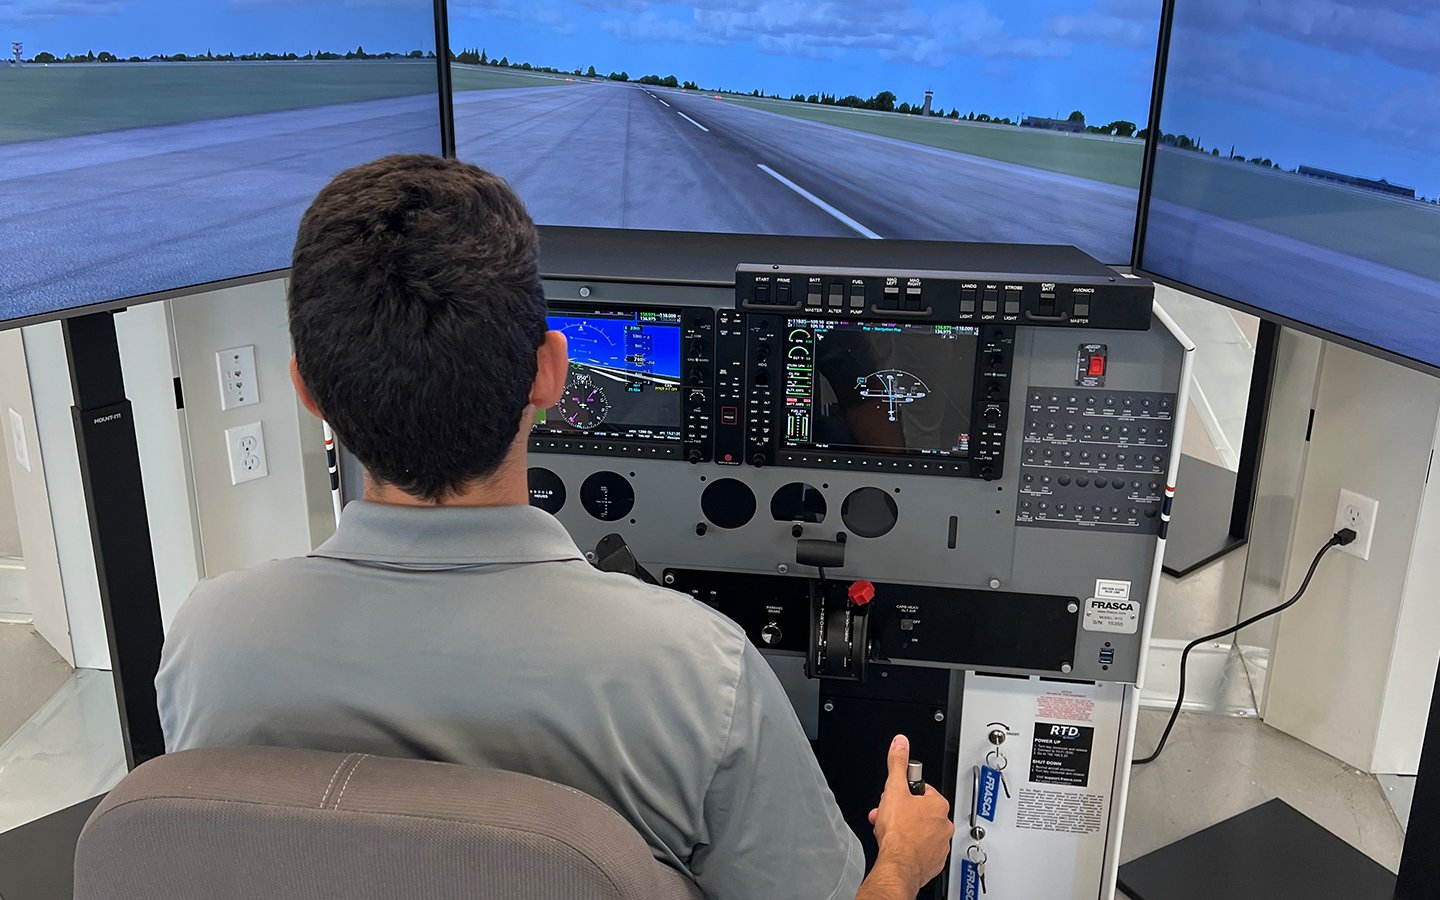 A student practices takeoff and landing on the FRASCA simulator